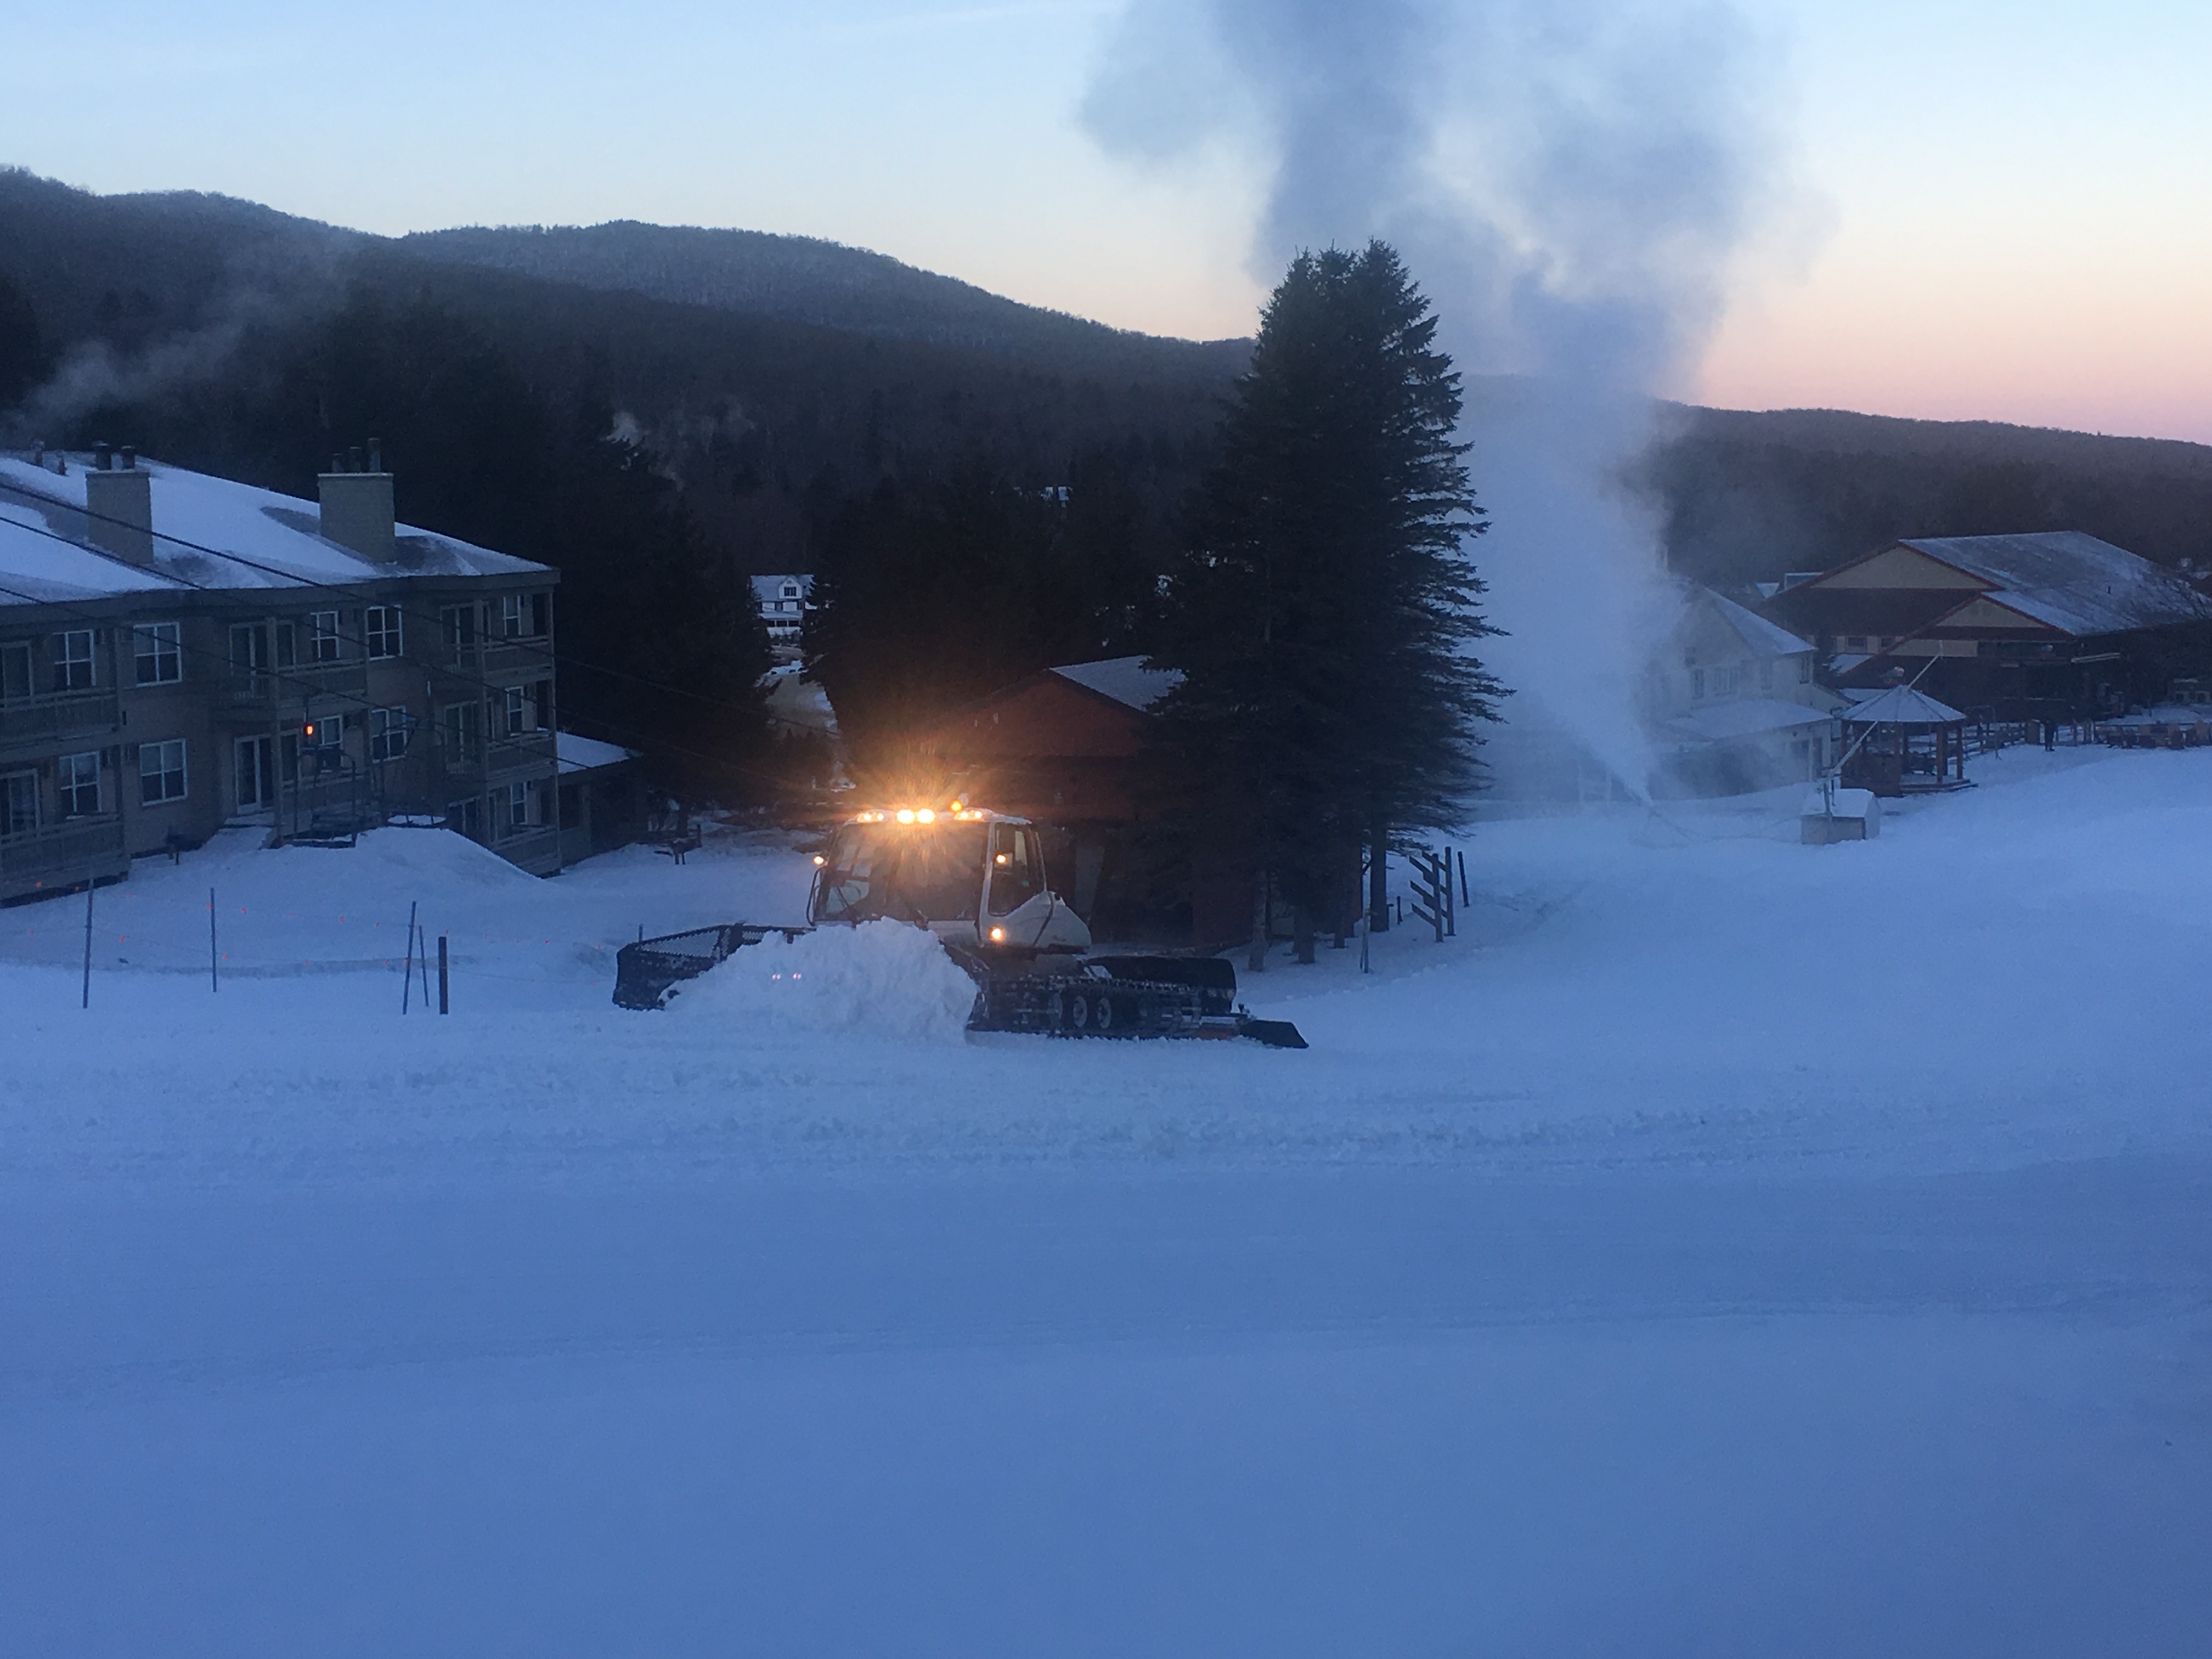 Grooming and Snowmaking December 19, 2016